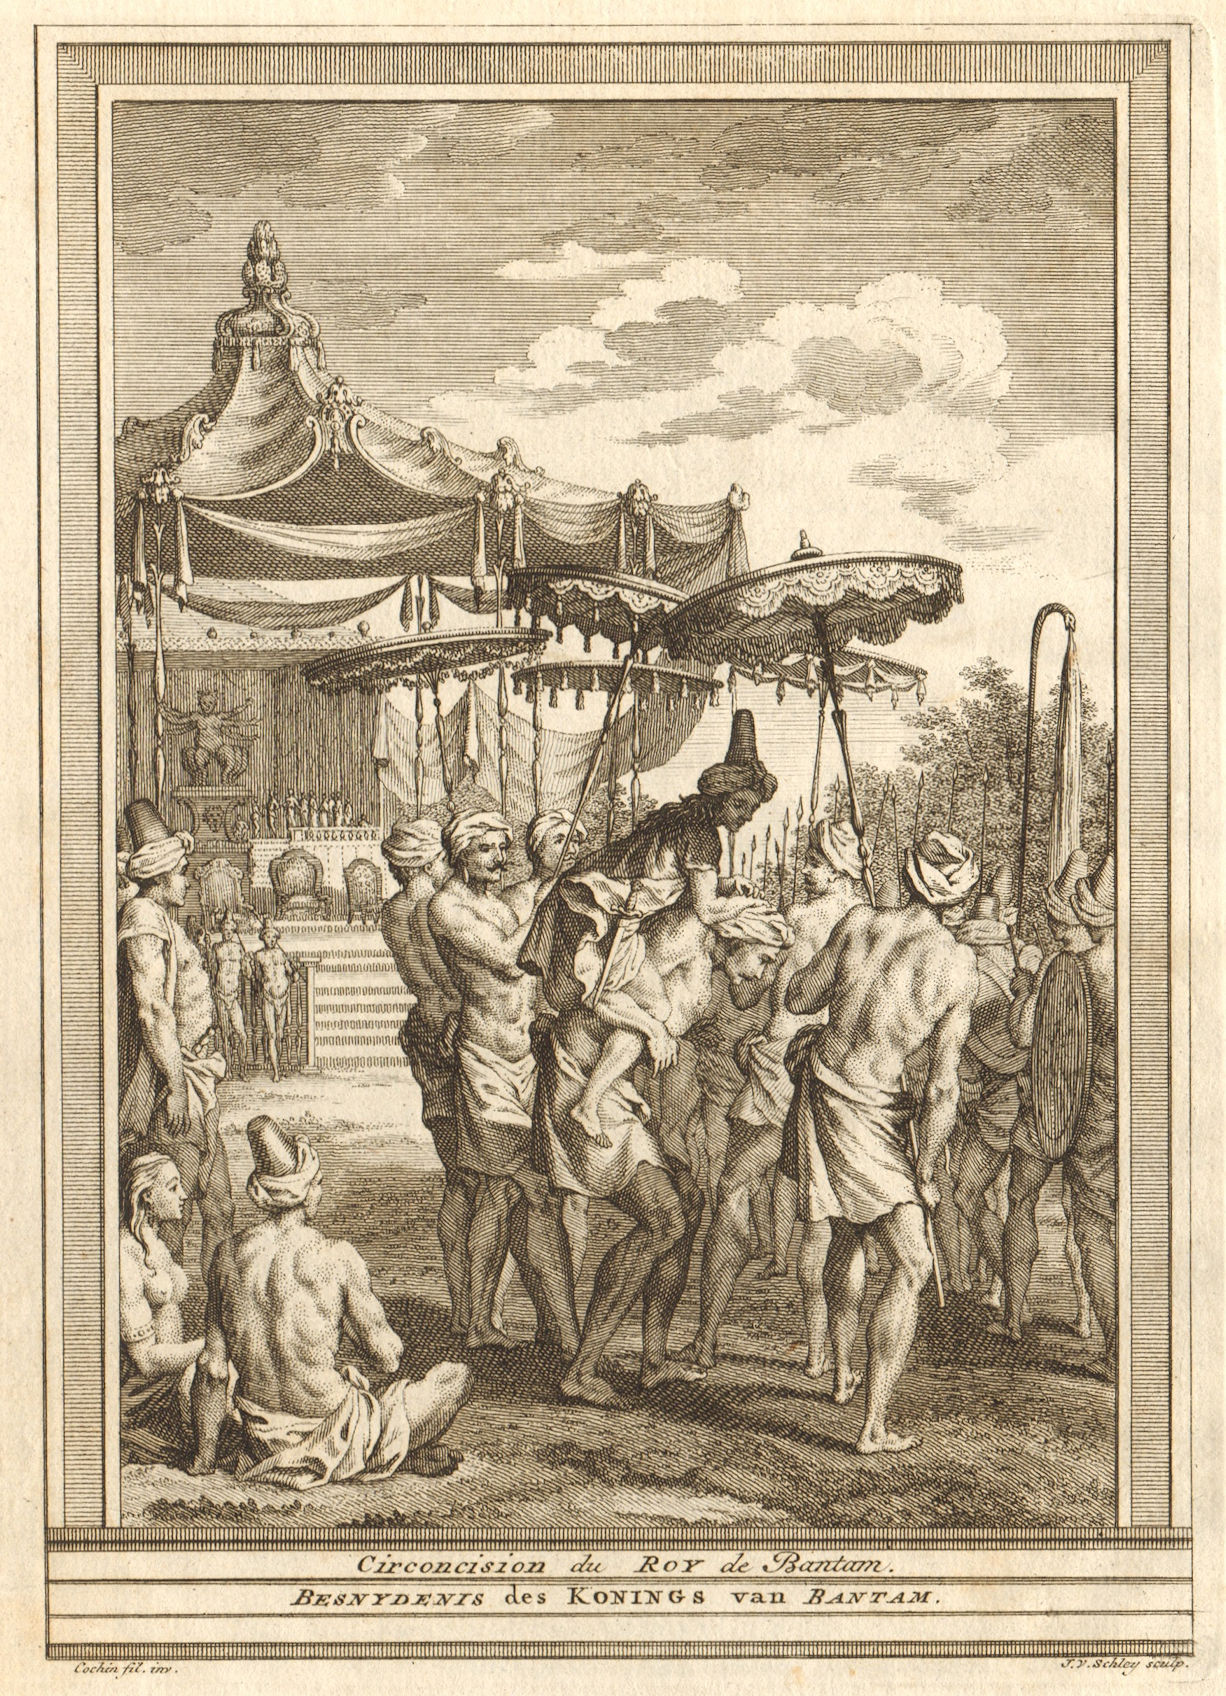 Circumcision of the King or Sultan of Banten (Bantam), Java. SCHLEY 1747 print